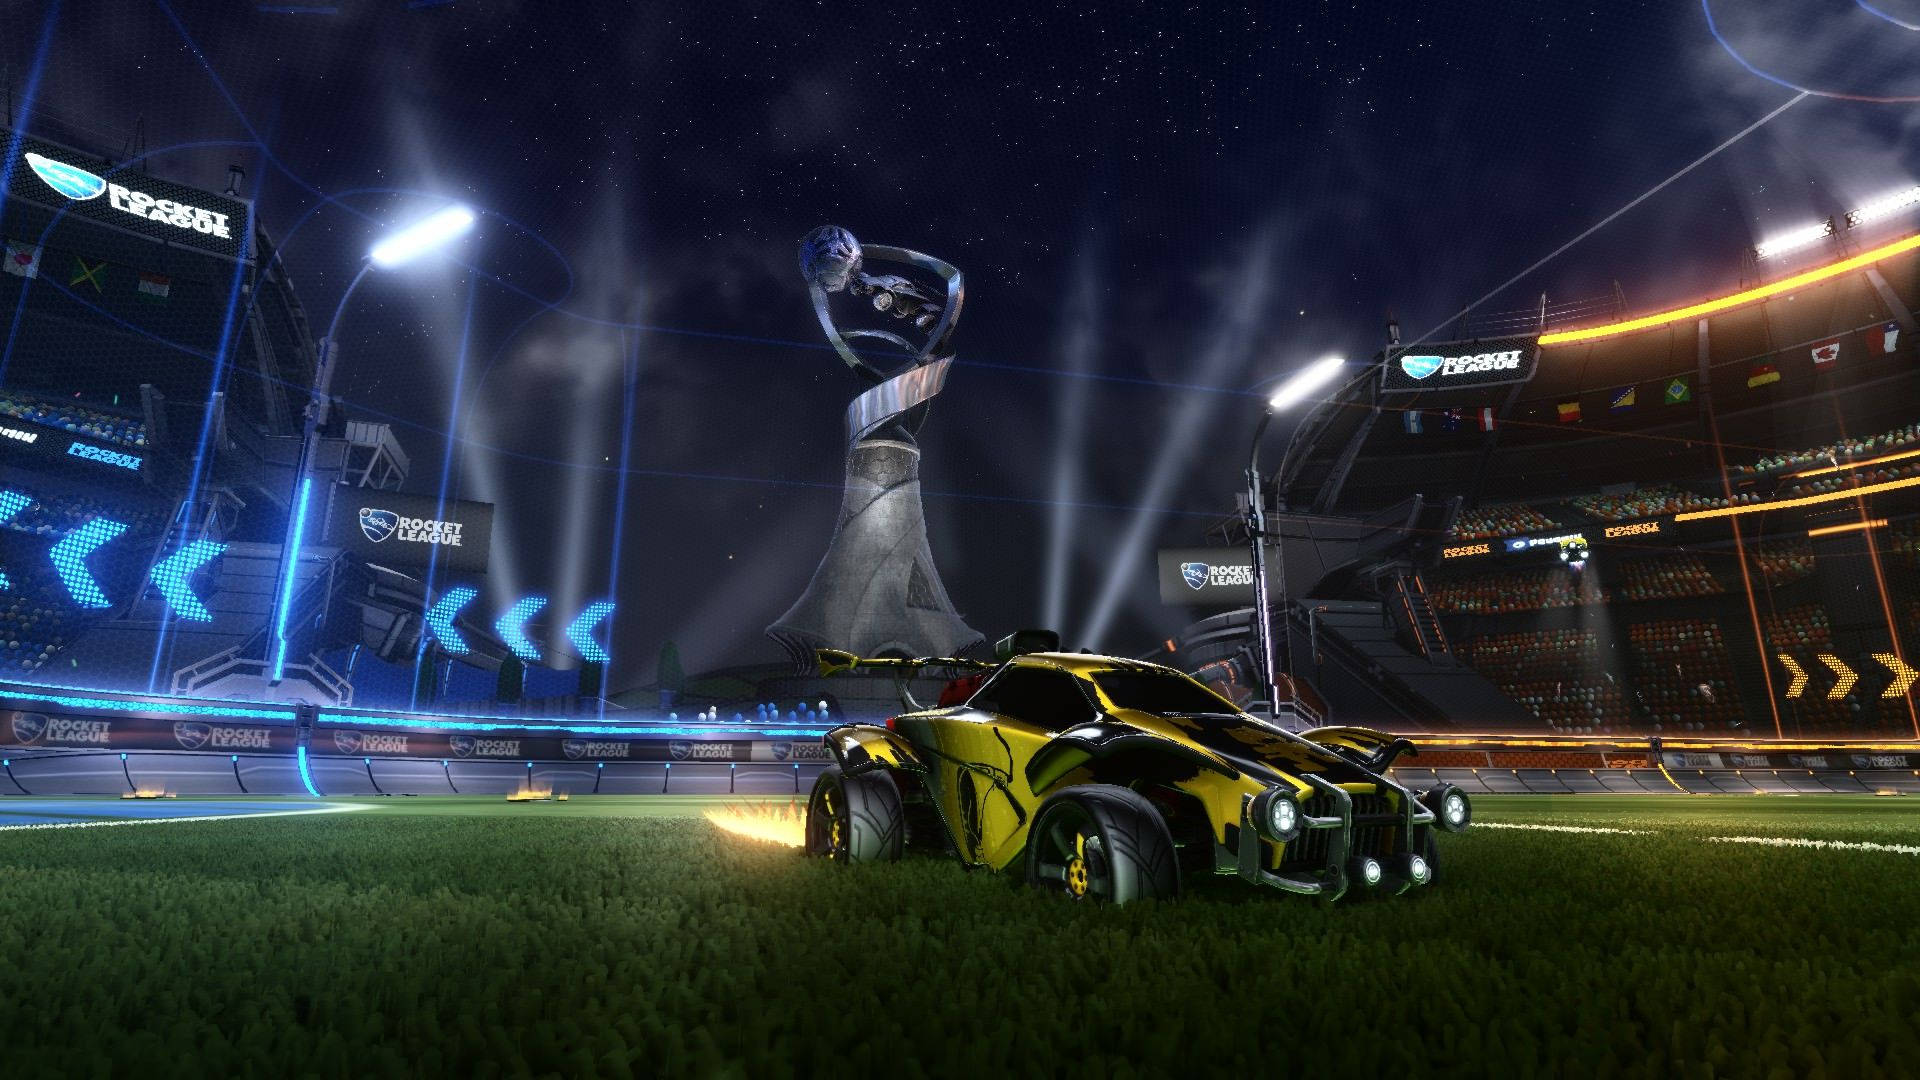 Cool Rocket League Car And Stadium Hd Background